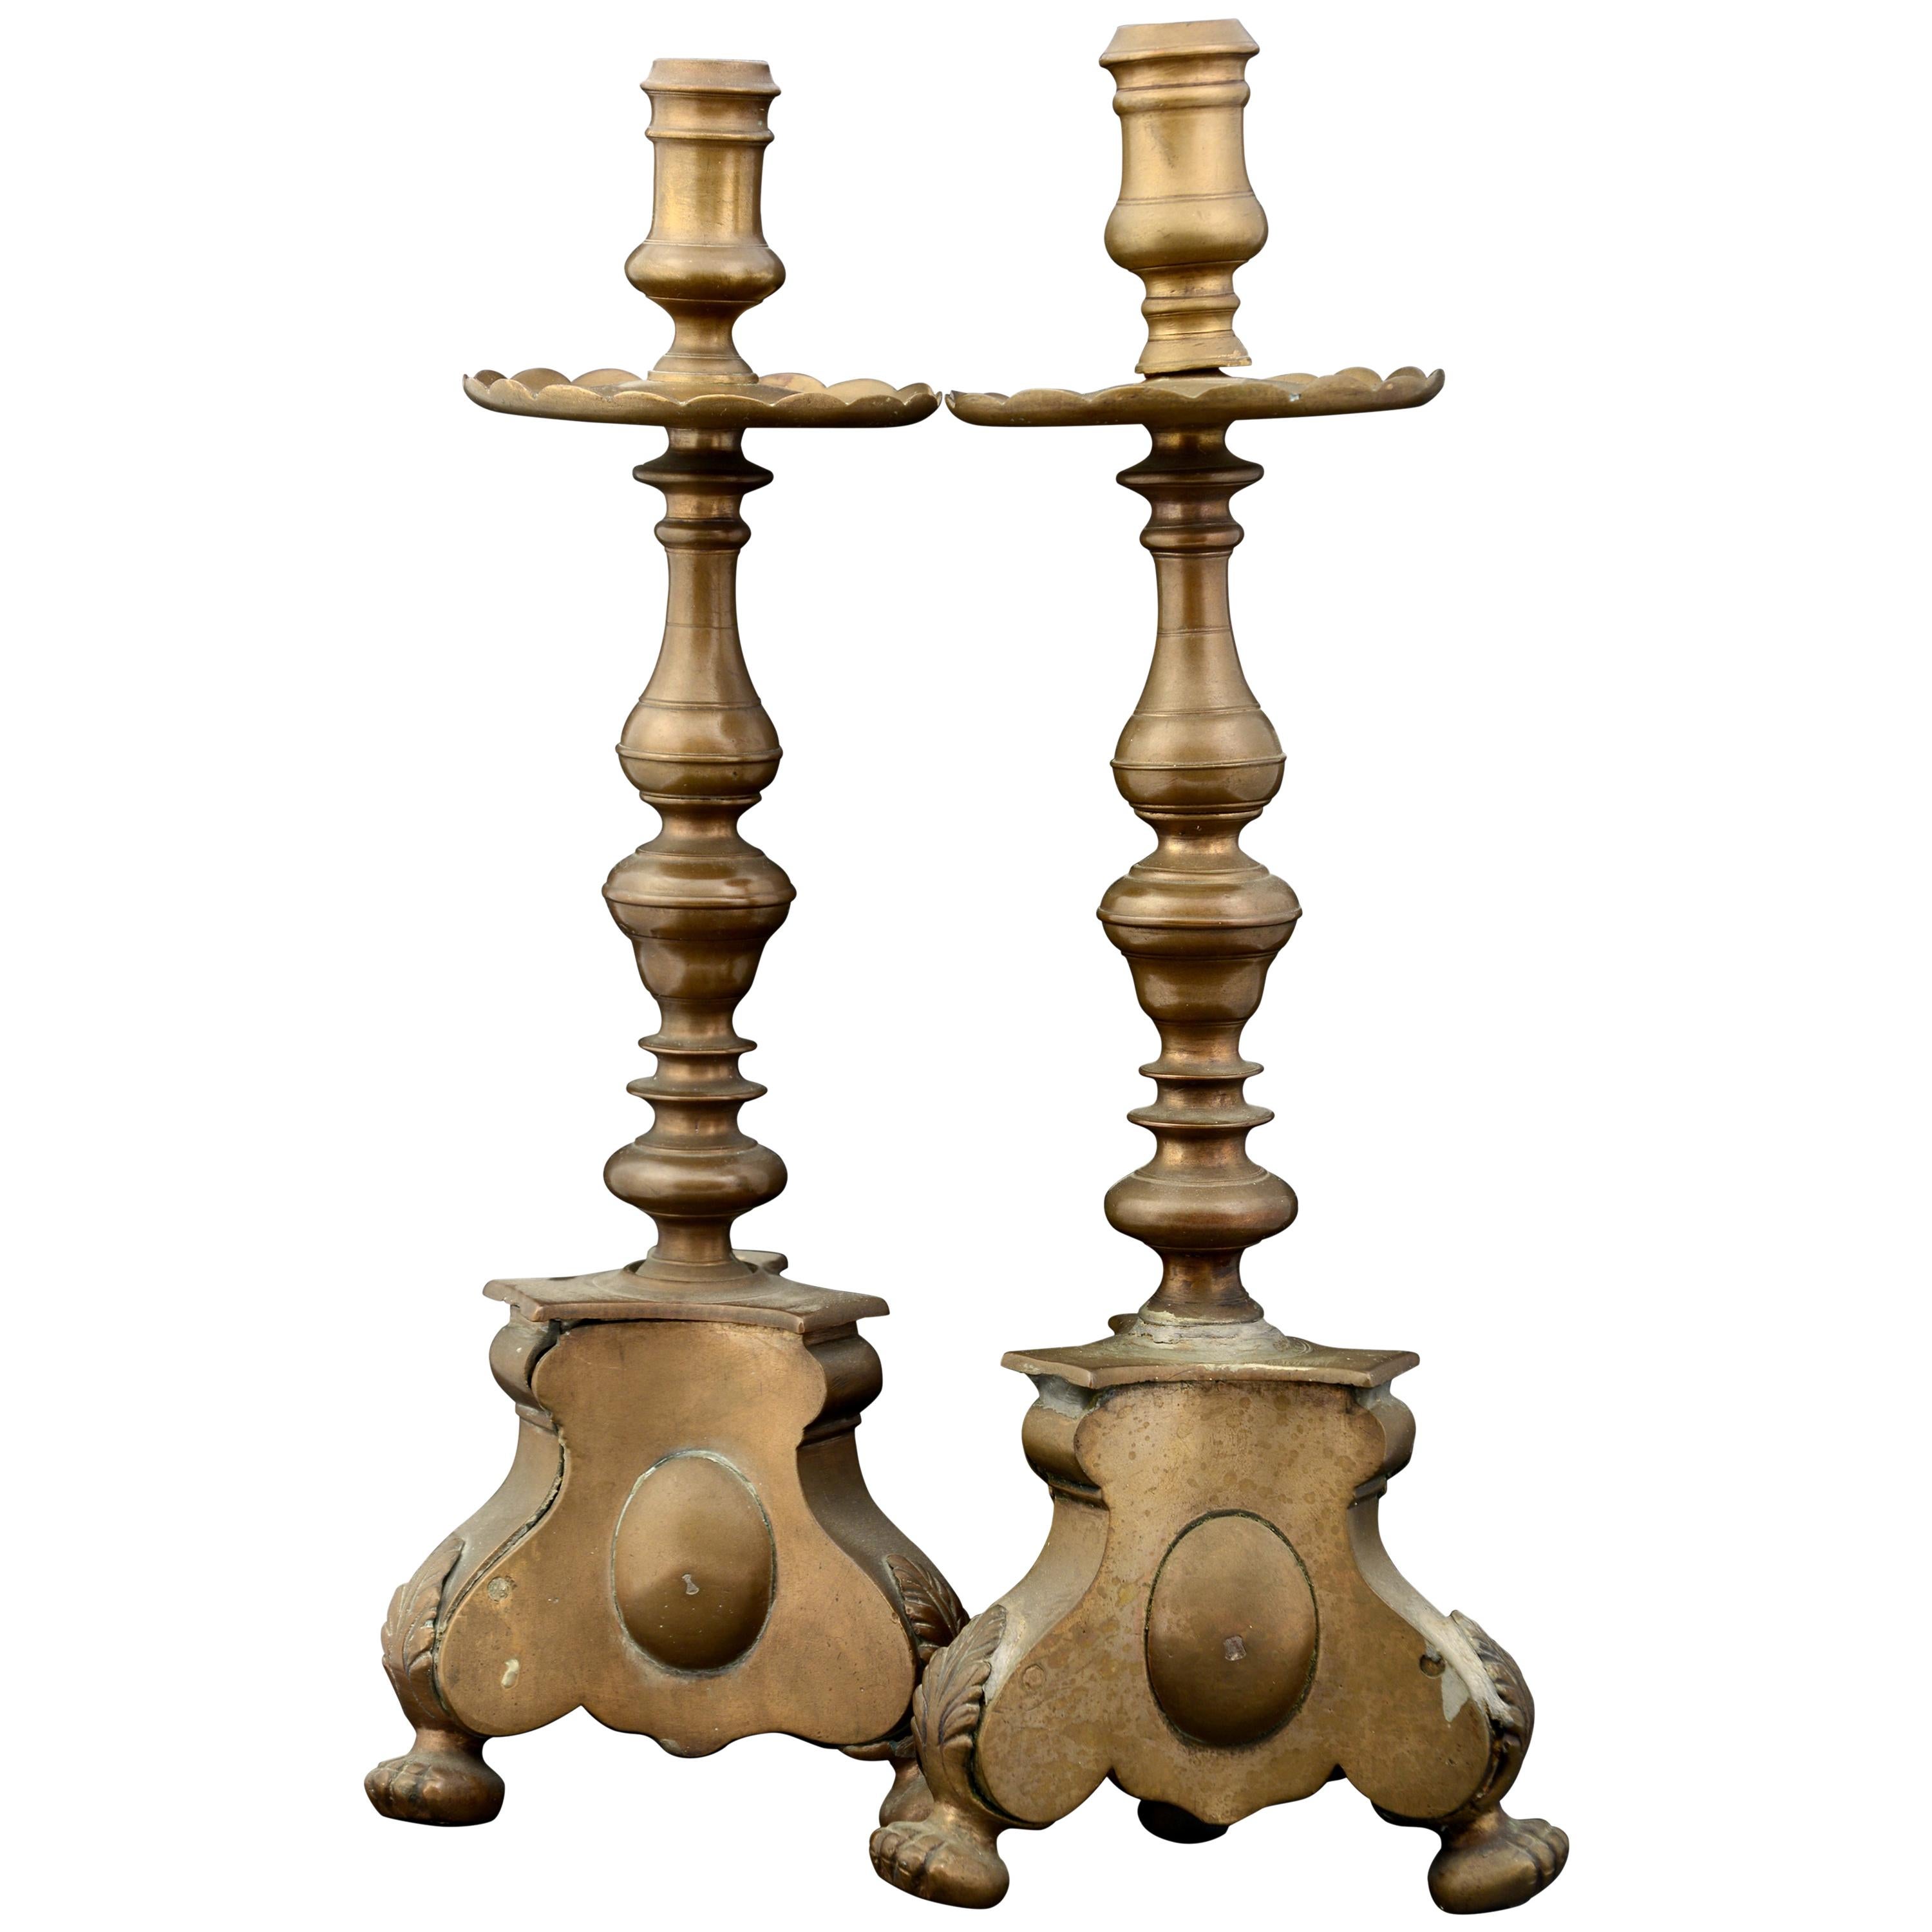 Pair of Candlesticks or Candleholders, Bronze, 18th Century